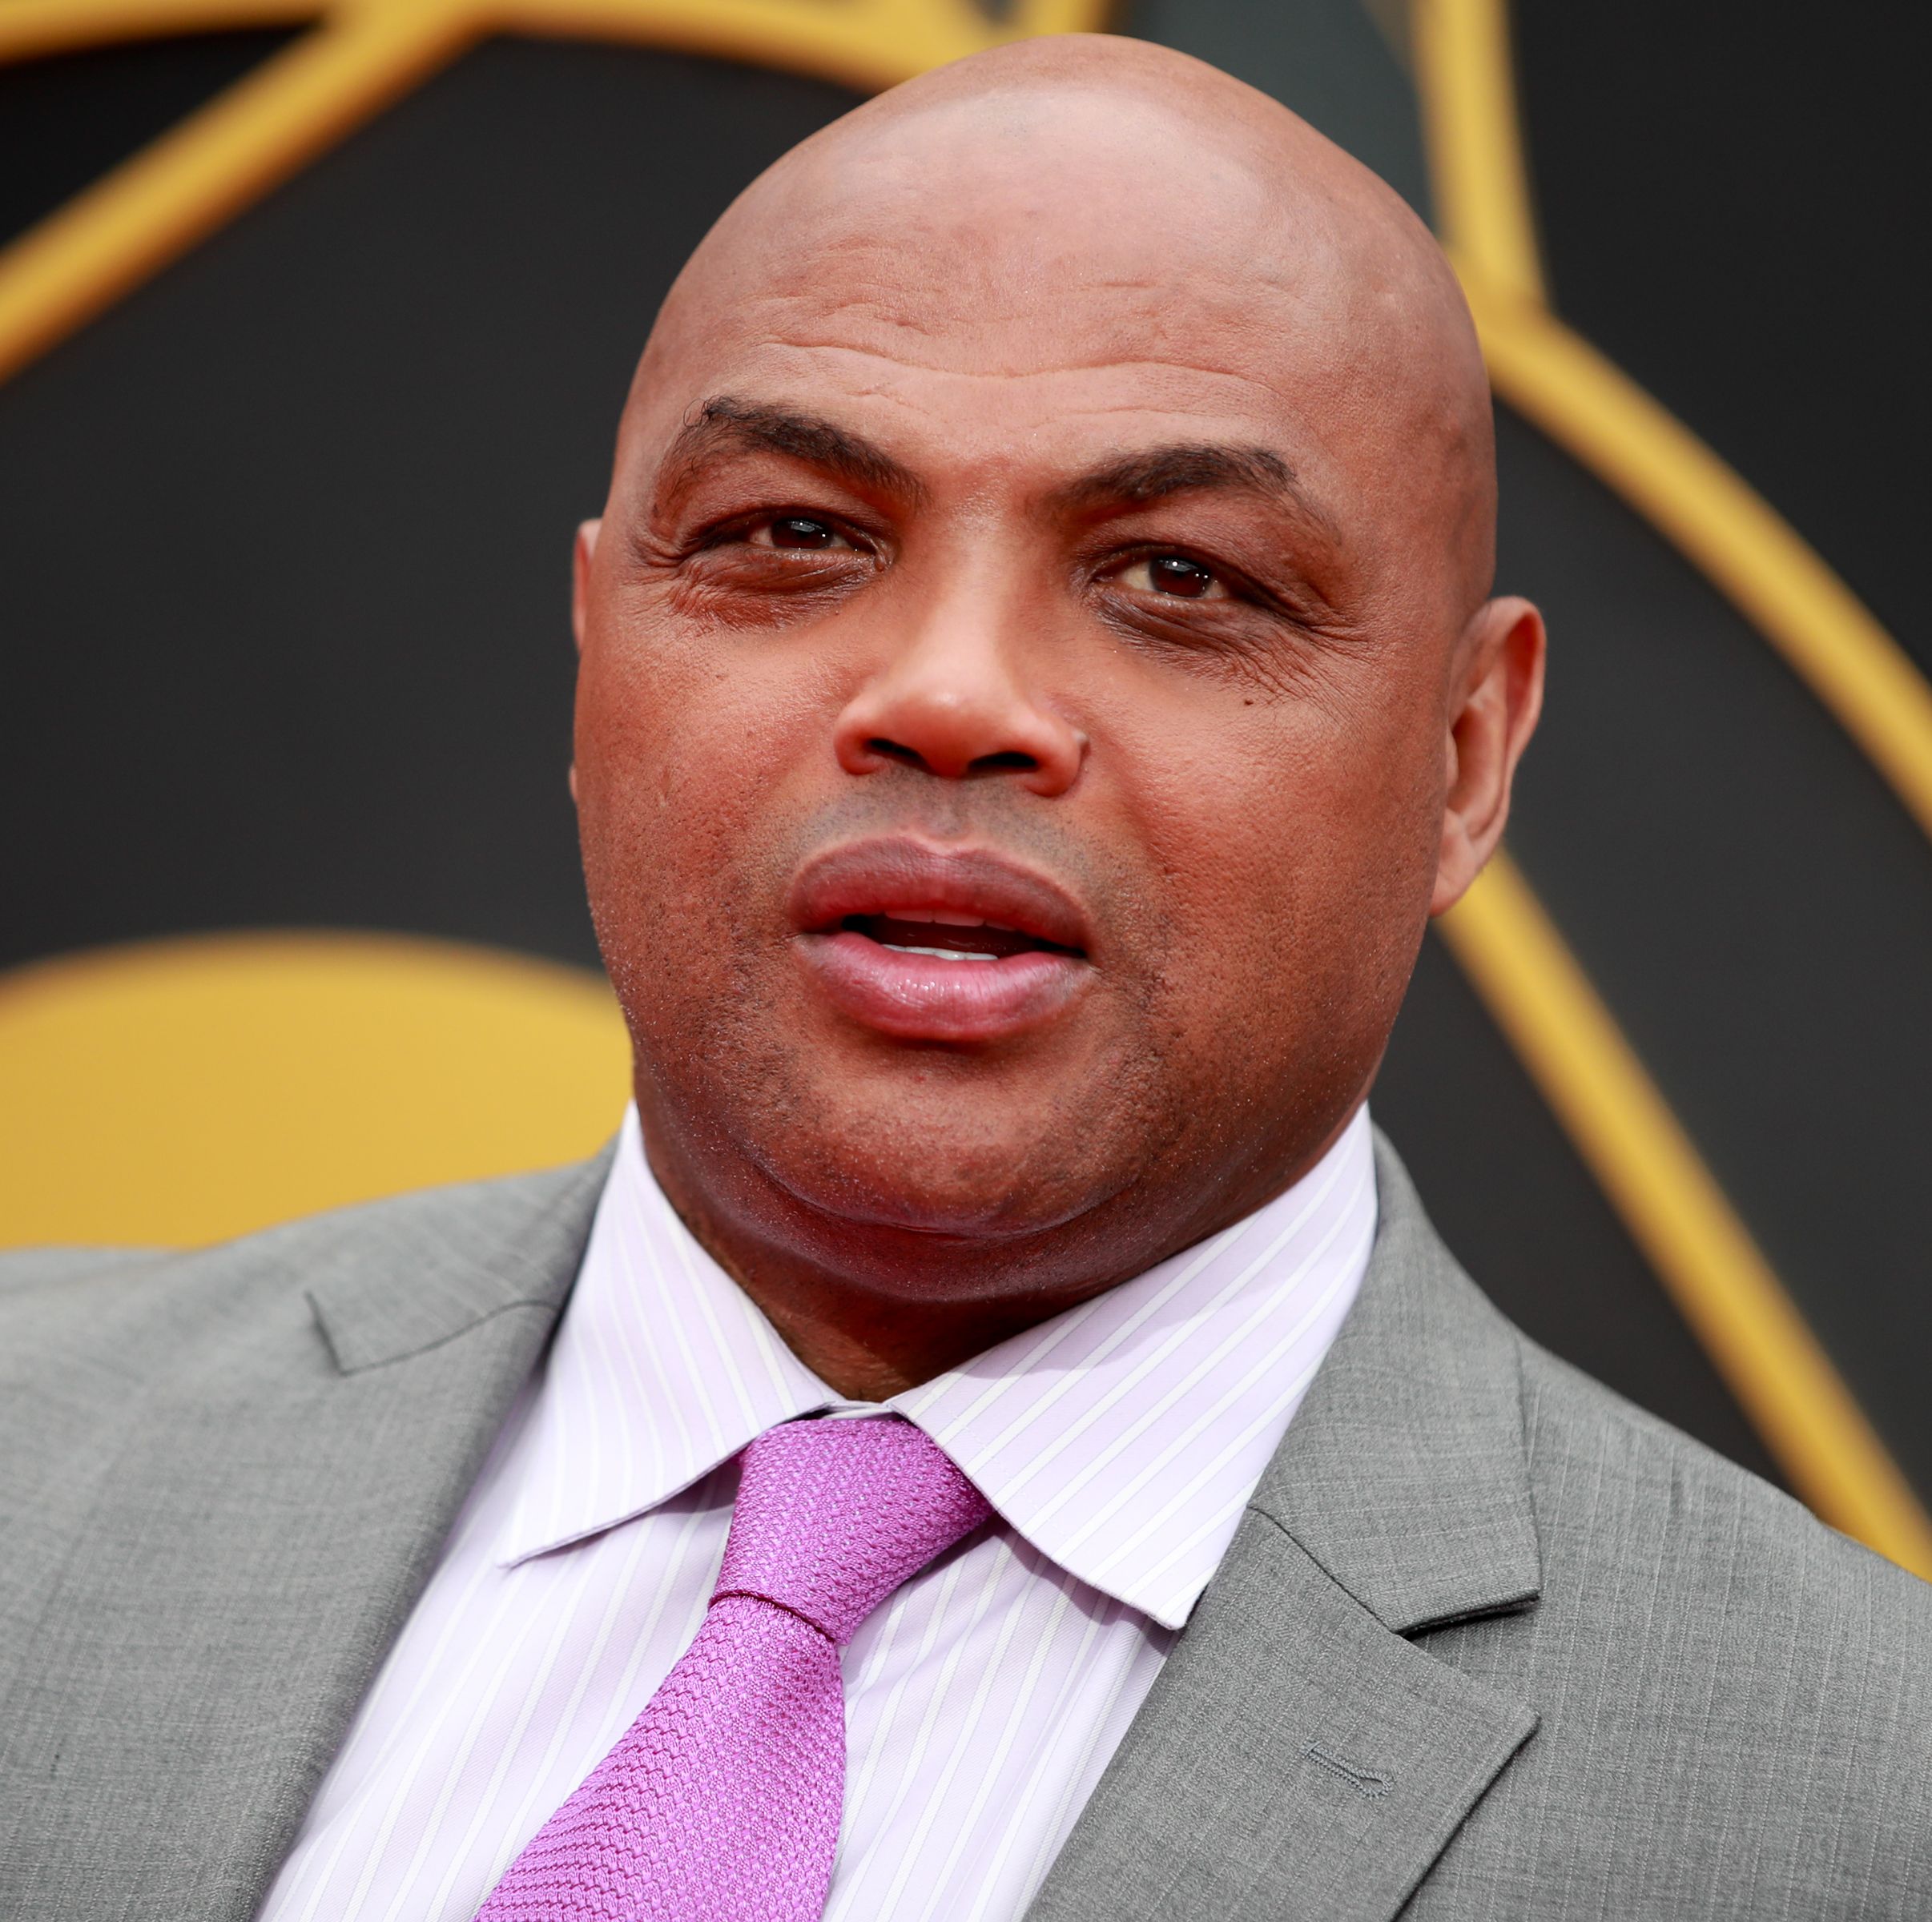 Charles Barkley Says ‘F*** You’ to Homophobes and Transphobes